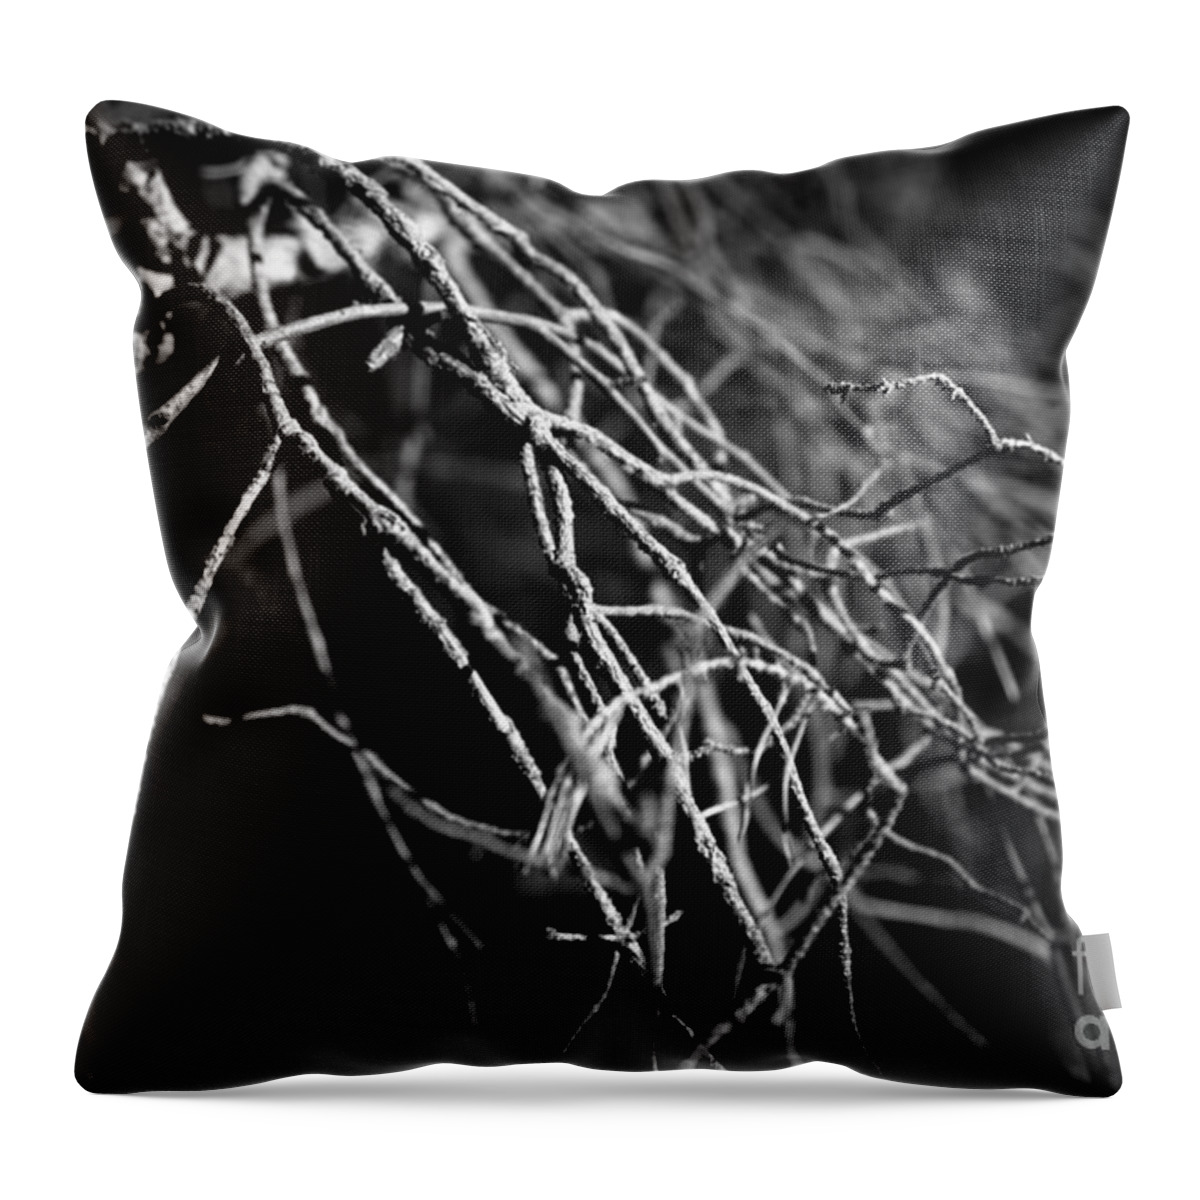 Twig Throw Pillow featuring the photograph Pine Twigs by Dariusz Gudowicz